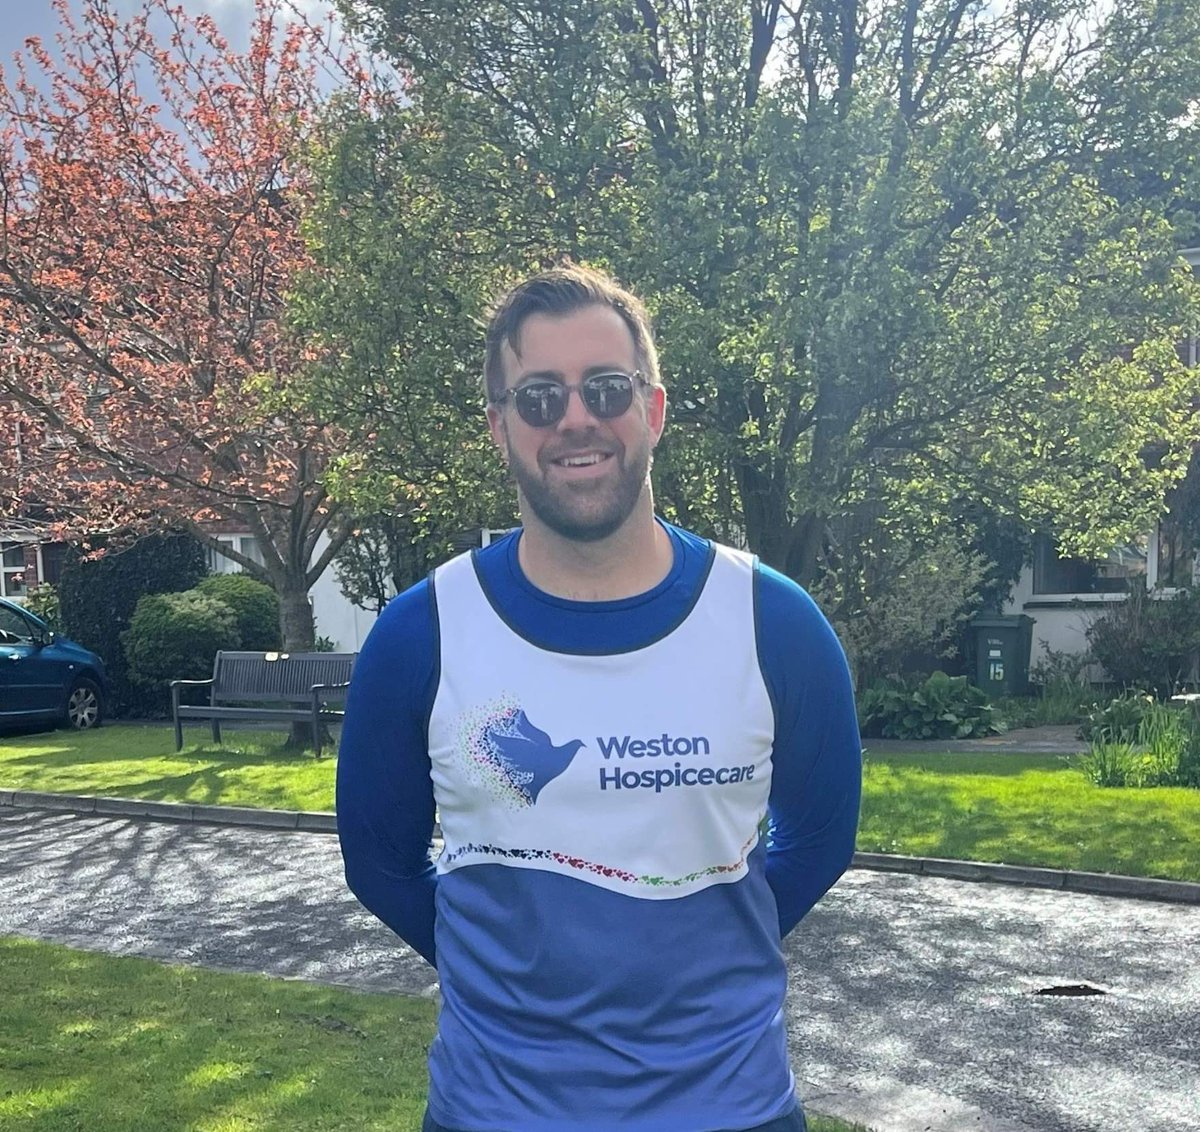 Good luck to #TeamSWASFT paramedic, Darran, who will be running this year’s #LondonMarathon for @WHCHospice 🎽💚 Darran has already raised an incredible £3,500 by swimming the English Channel and hopes to reach his new target of £5,000! Read more here ➡️ swast.nhs.uk/news/weston-pa…